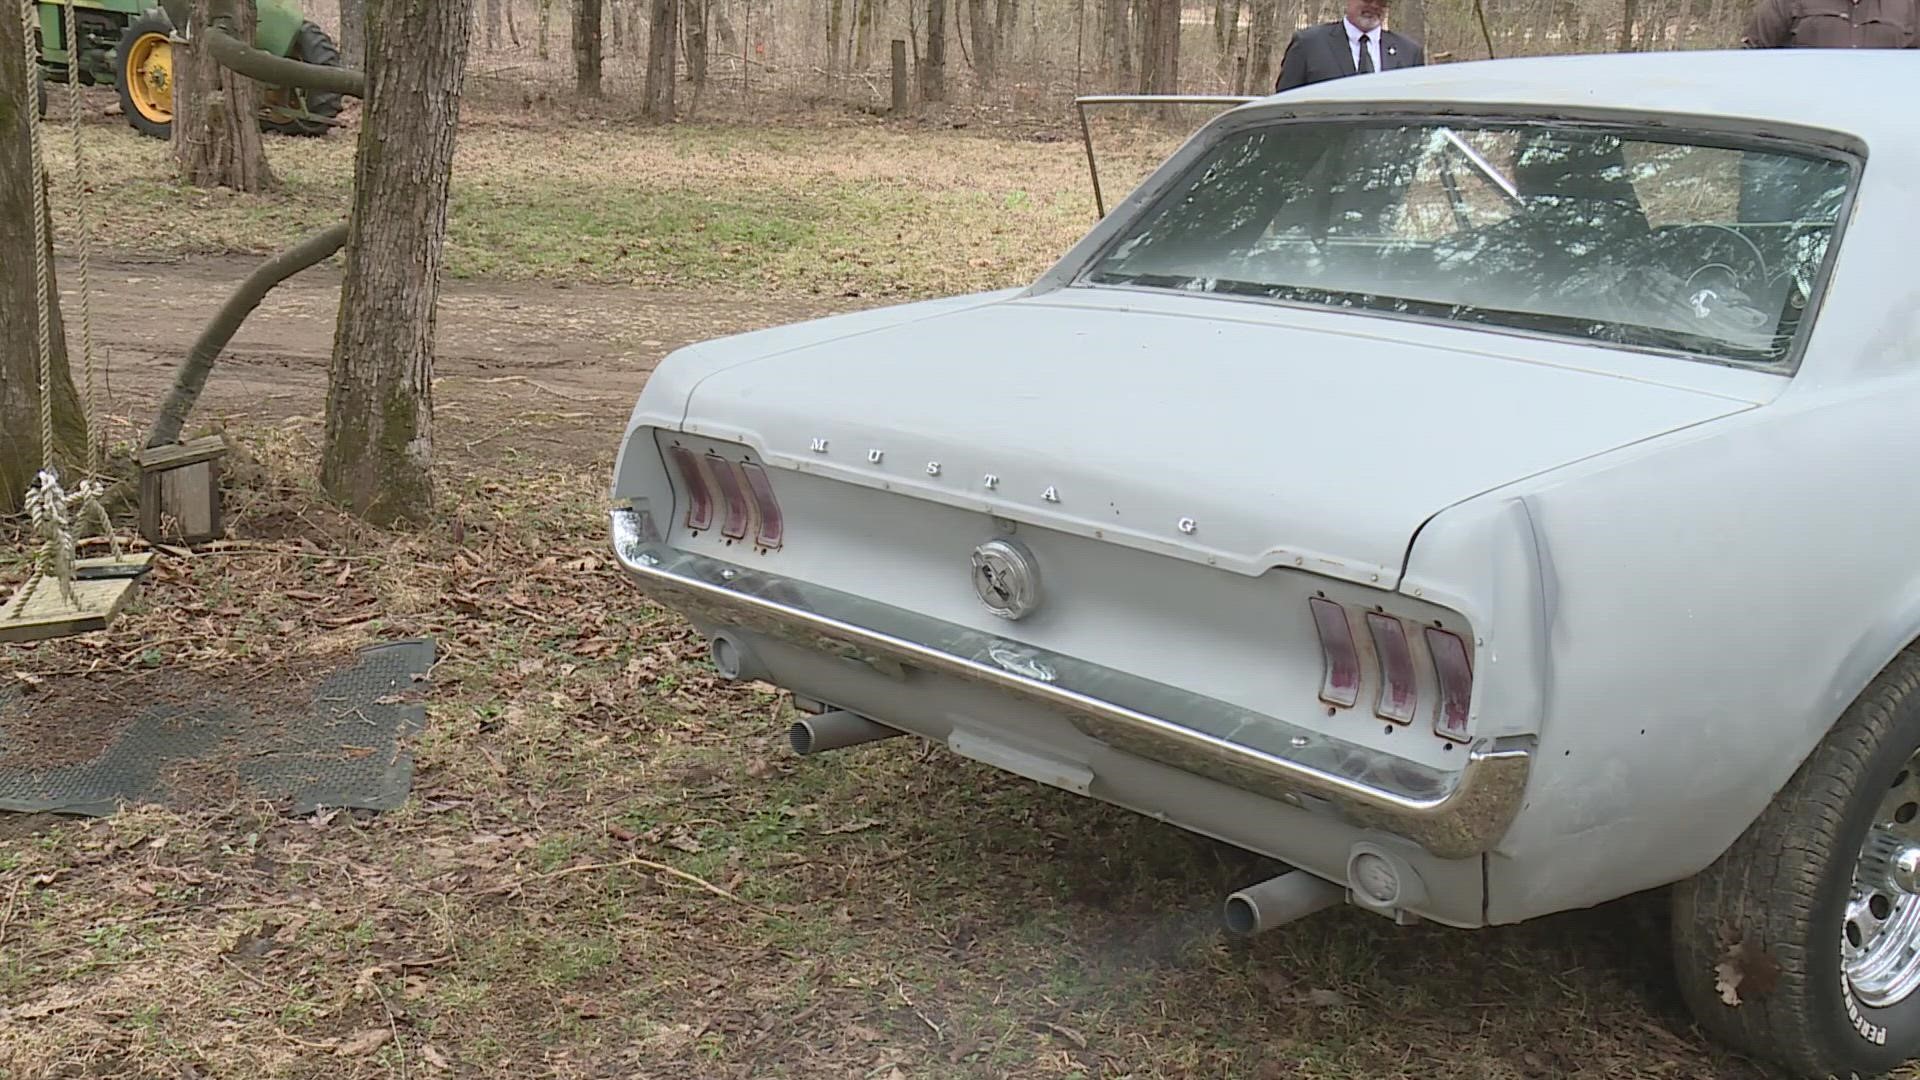 Don Morgan never thought he'd see his 1968 Mustang after it was stolen from his shop in October of 2021, but investigators tracked it down and brought it home.